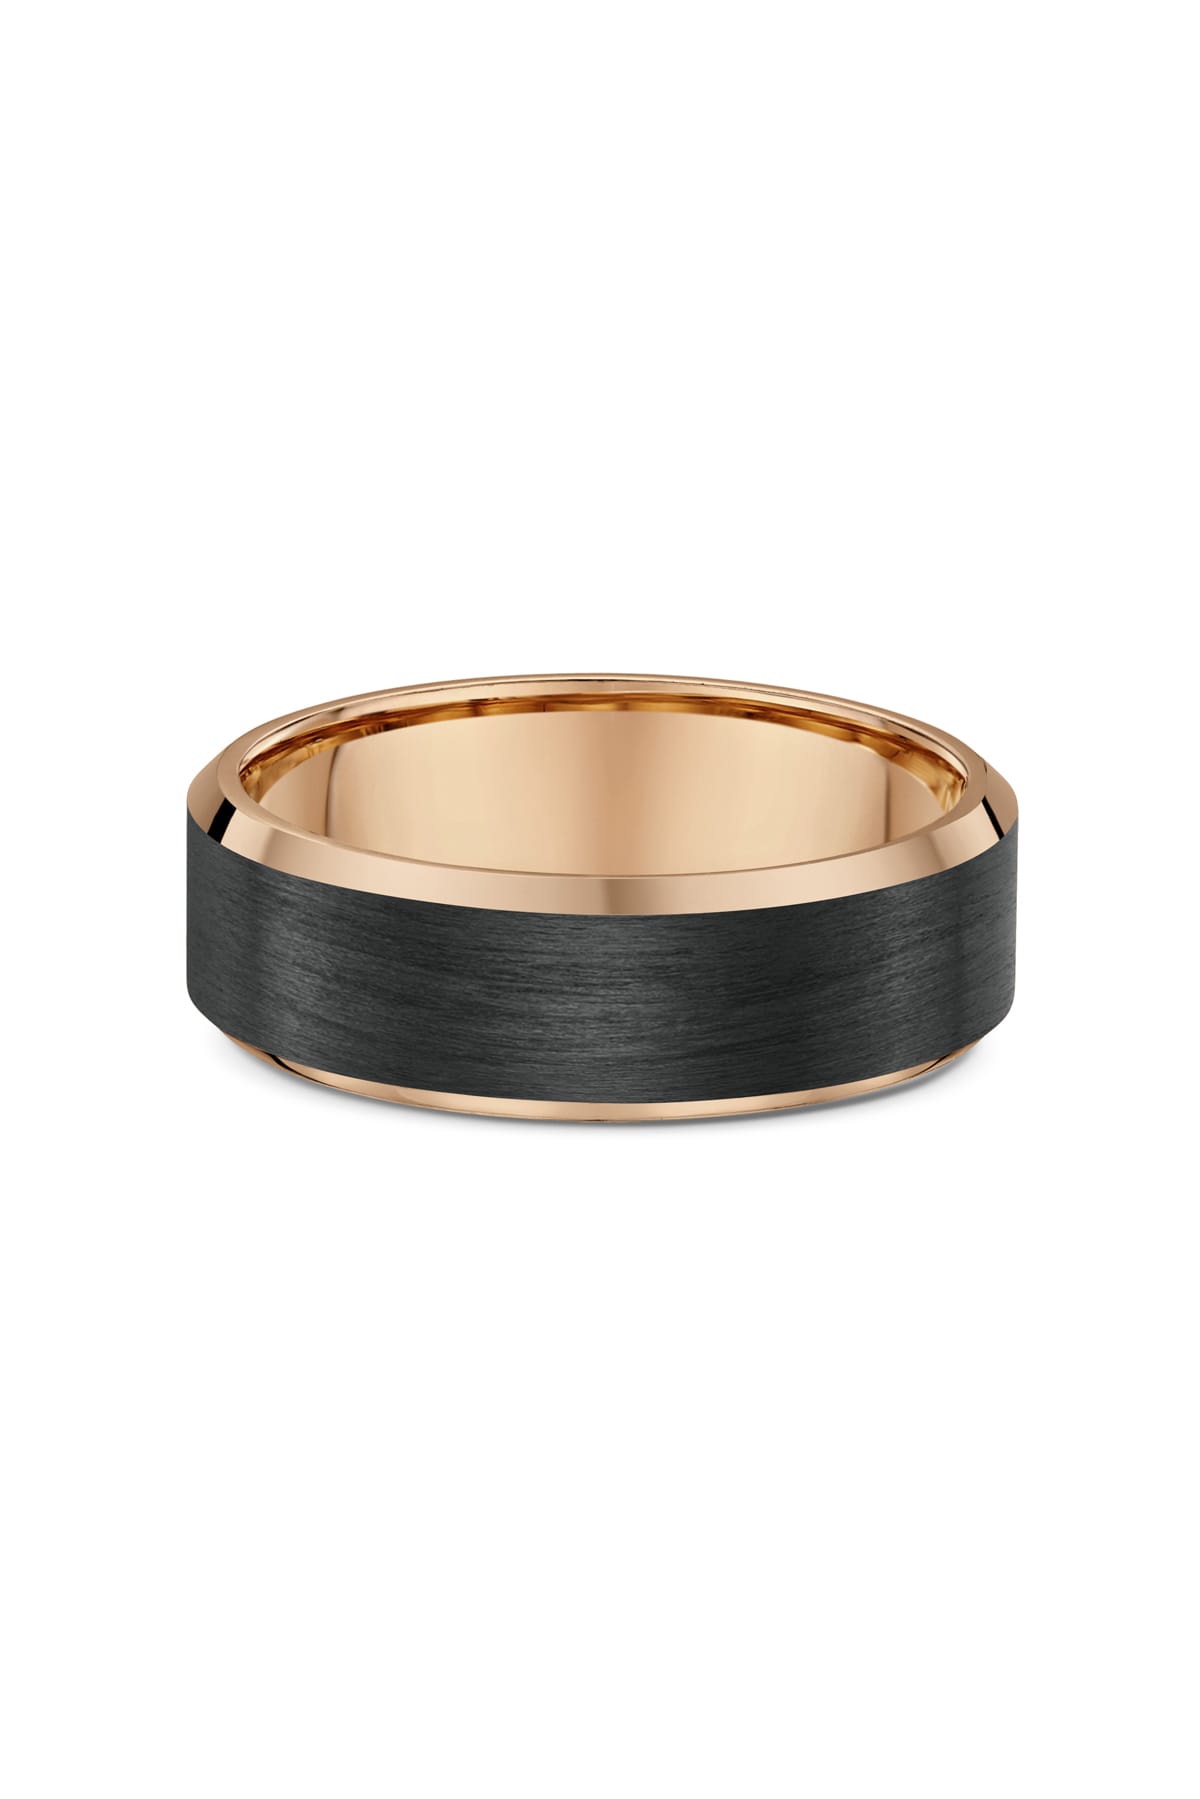 Men's Wedding Ring in rose gold 592B00 available at LeGassick Diamonds and Jewellery Gold Coast, Australia.